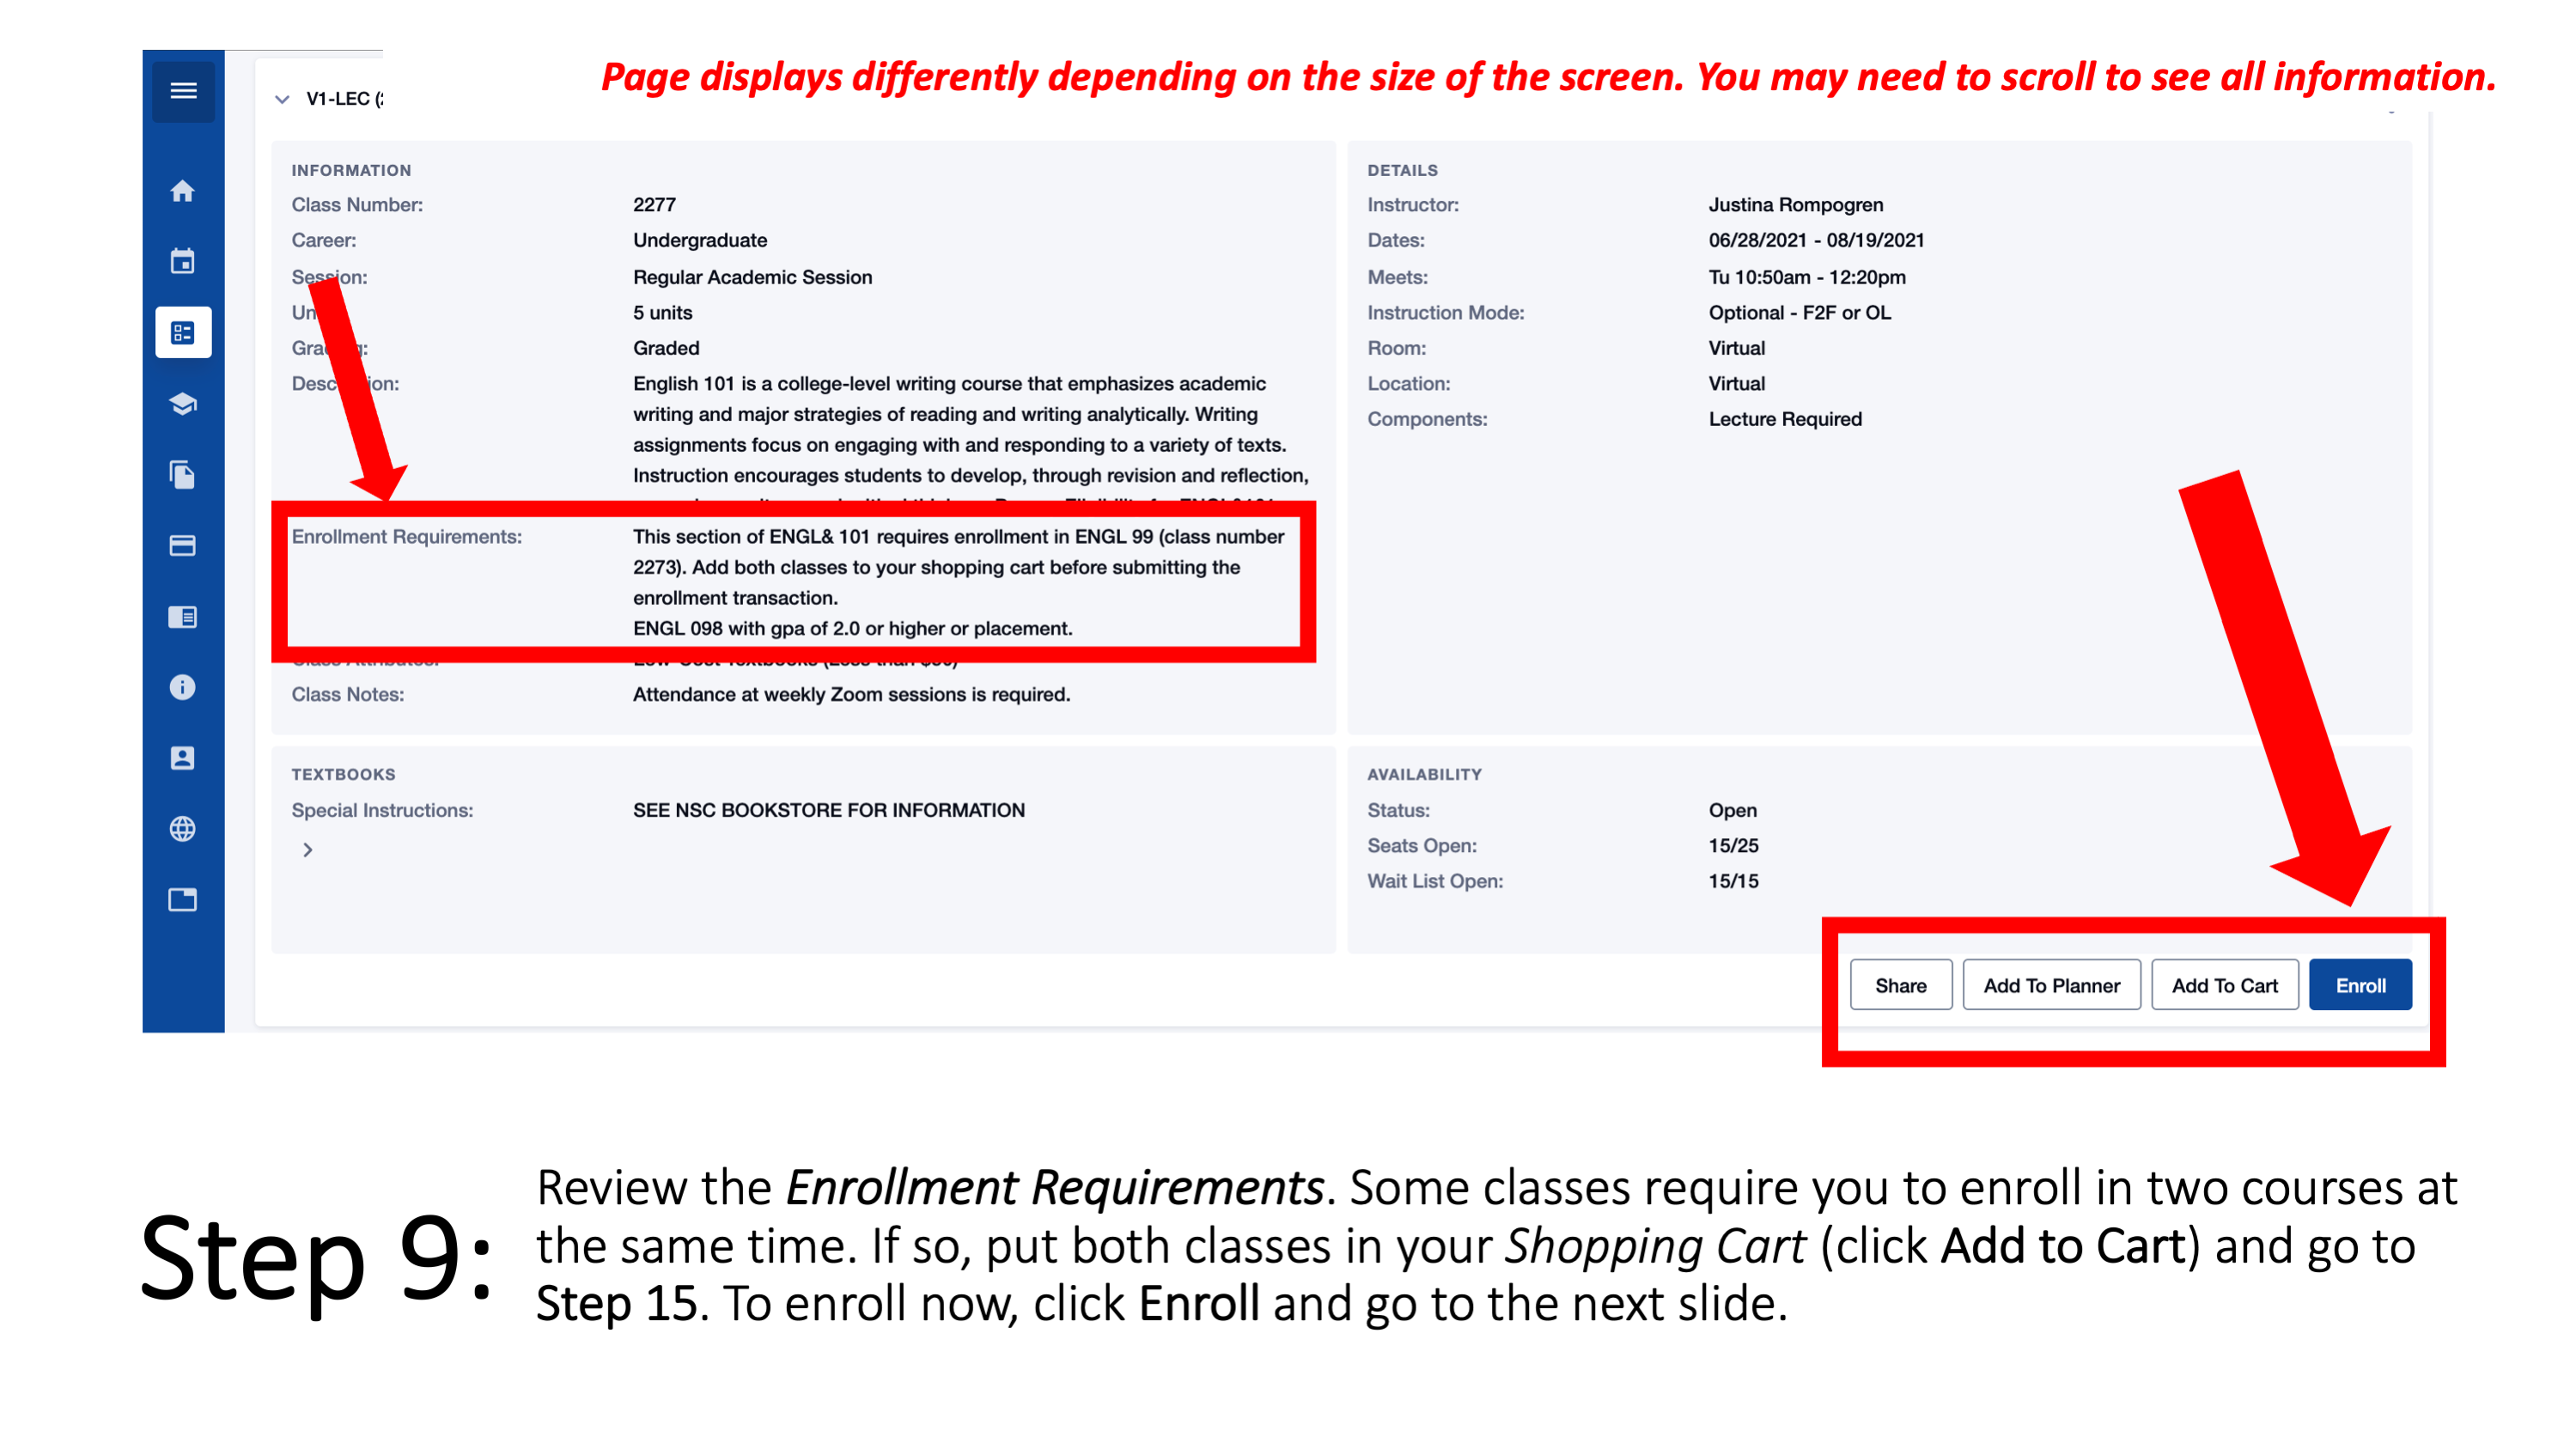 Step 9: Review the Enrollment Requirements. Some classes require you to enroll in two courses at the same time. If so, put both classes in your Shopping Cart (click Add to Cart) and go to Step 15. To enroll now, click Enroll and go to the next slide. Page displays differently depending on the size of the screen. You may need to scroll to see all information.